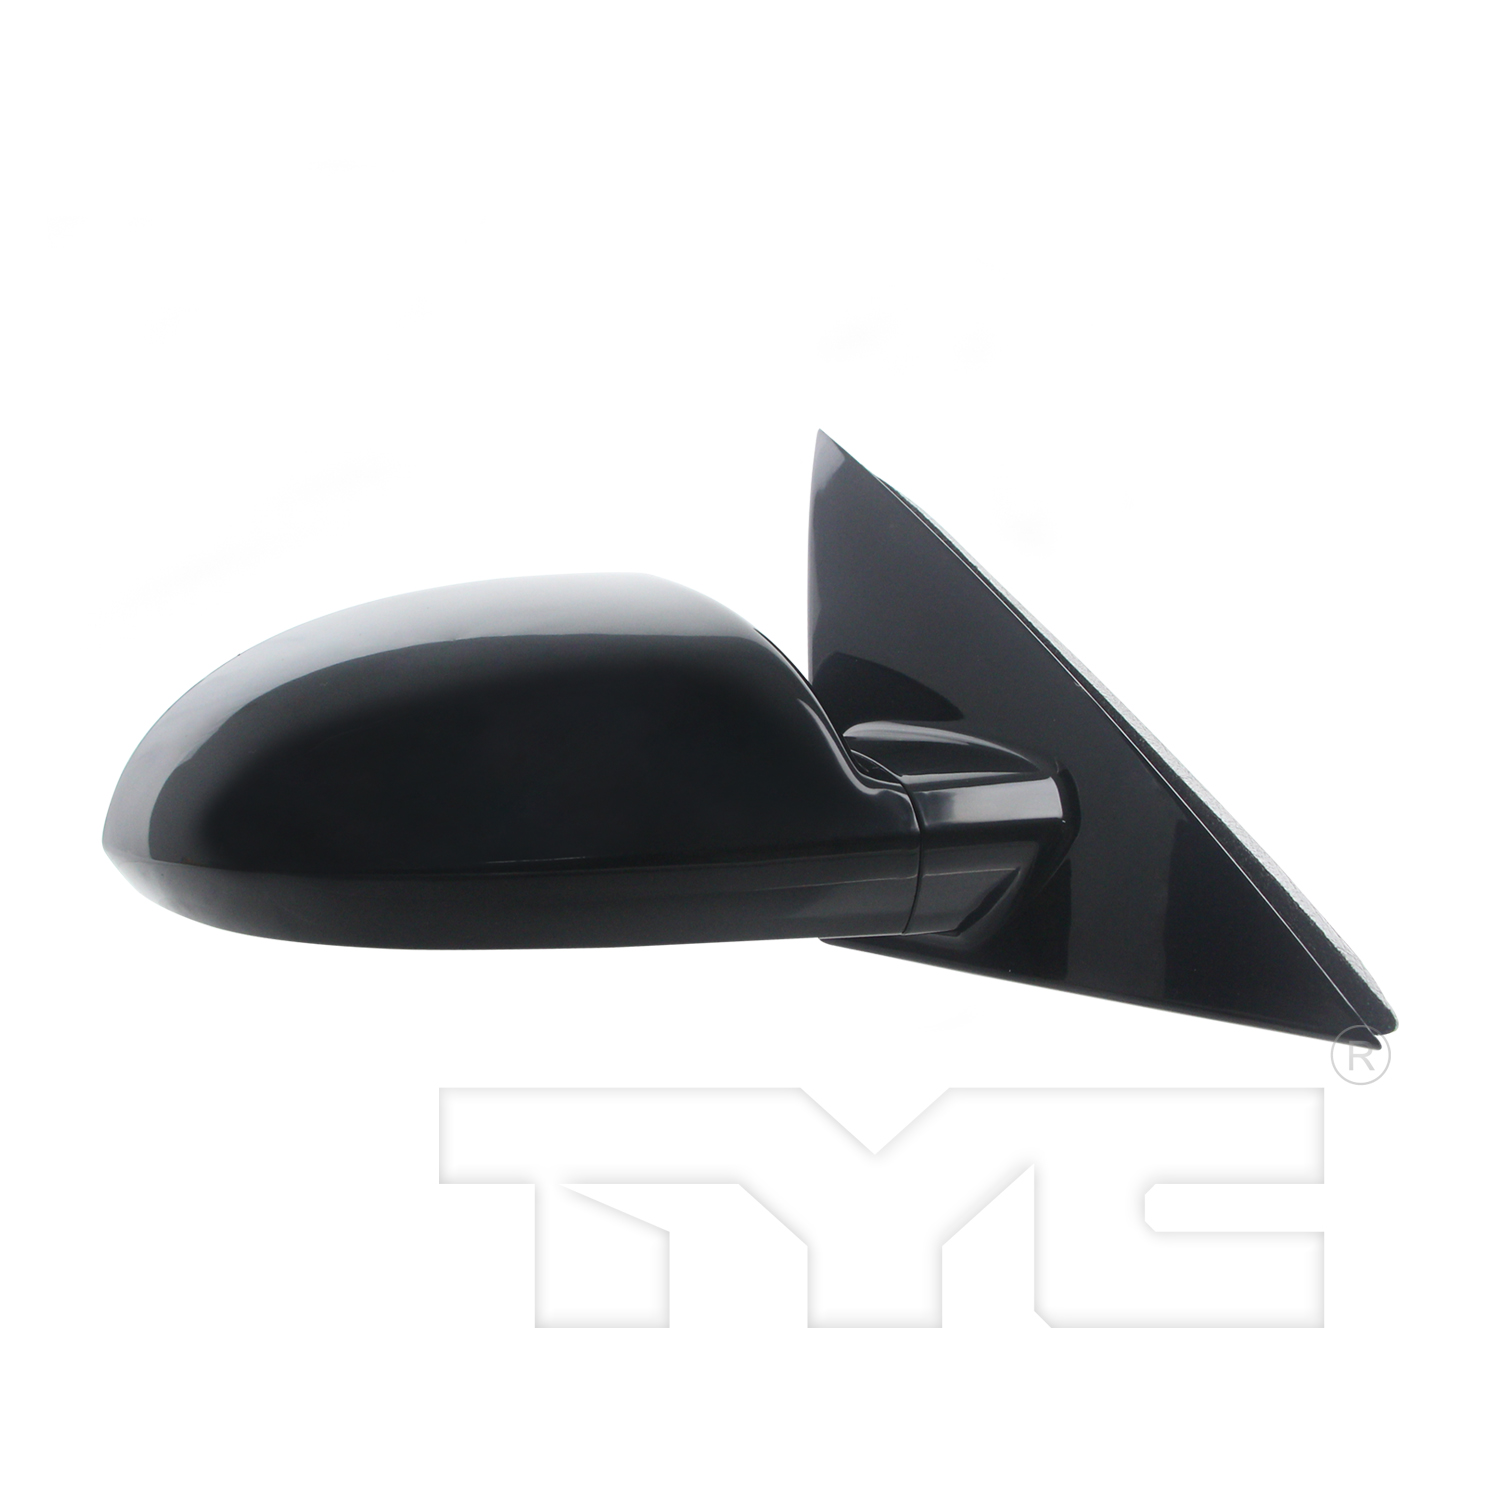 Aftermarket MIRRORS for CHEVROLET - IMPALA, IMPALA,09-13,RT Mirror outside rear view